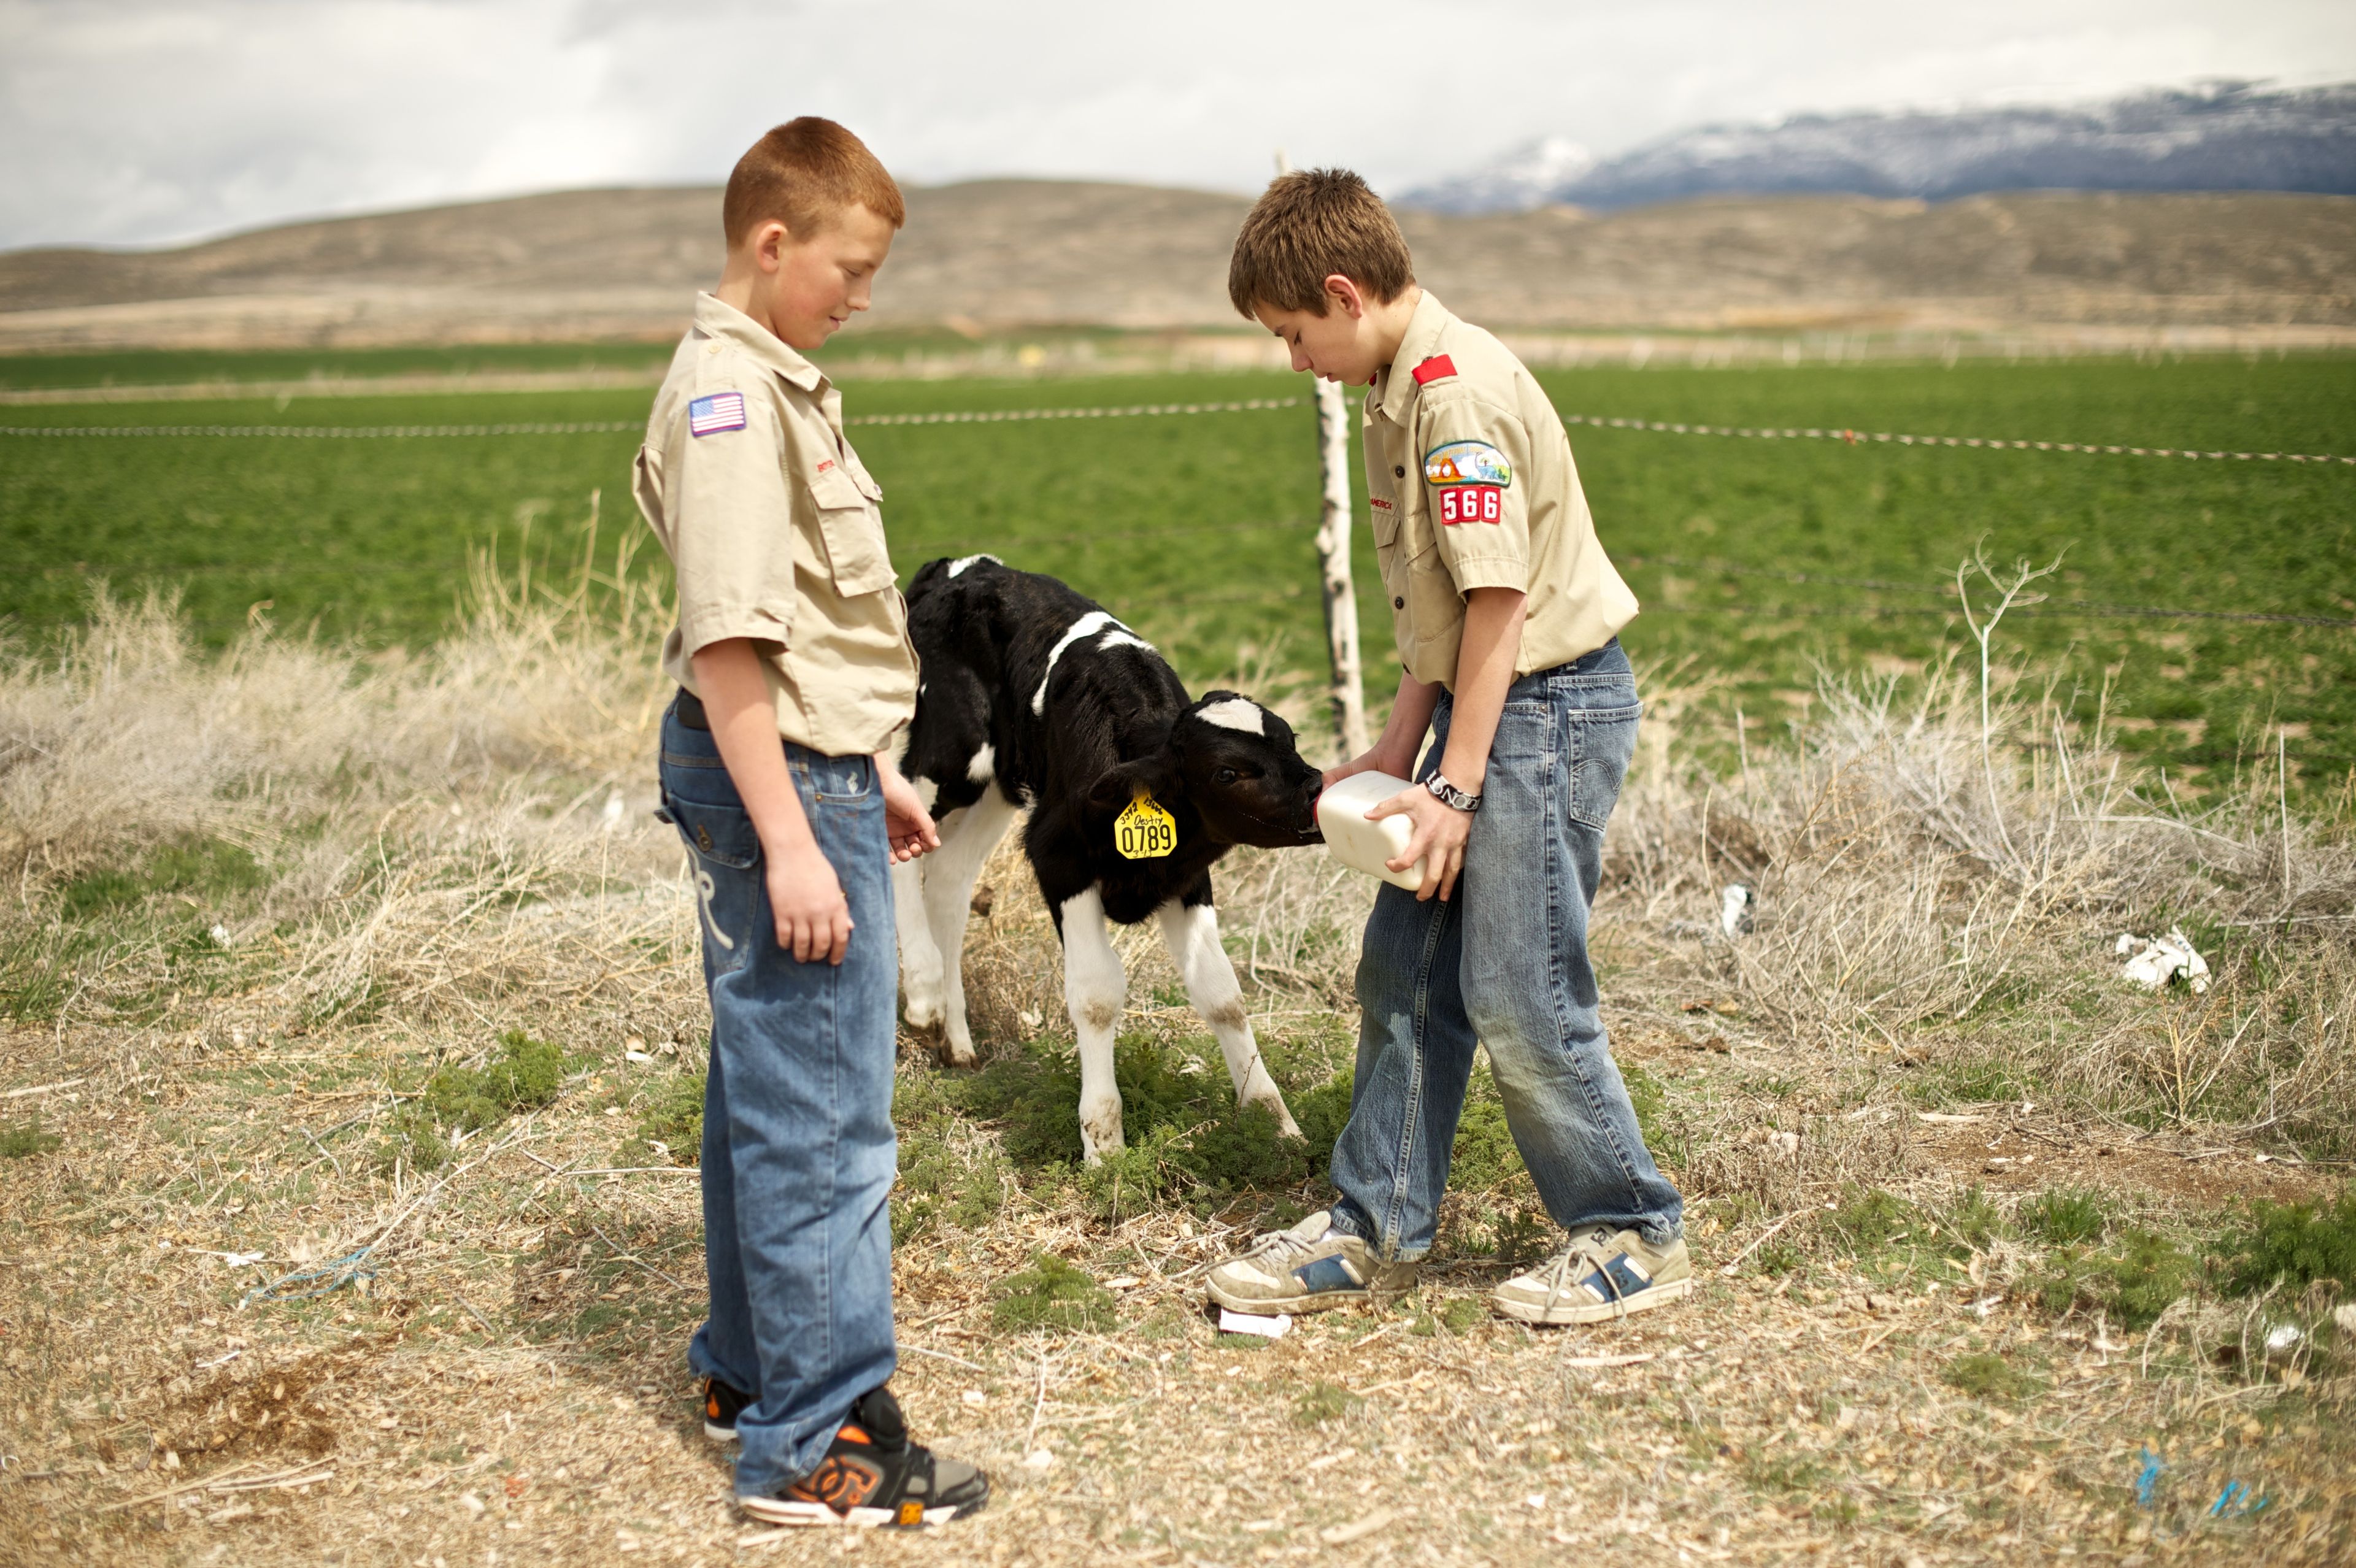 Two Boy Scouts standing by a field, feeding a calf with a bottle.